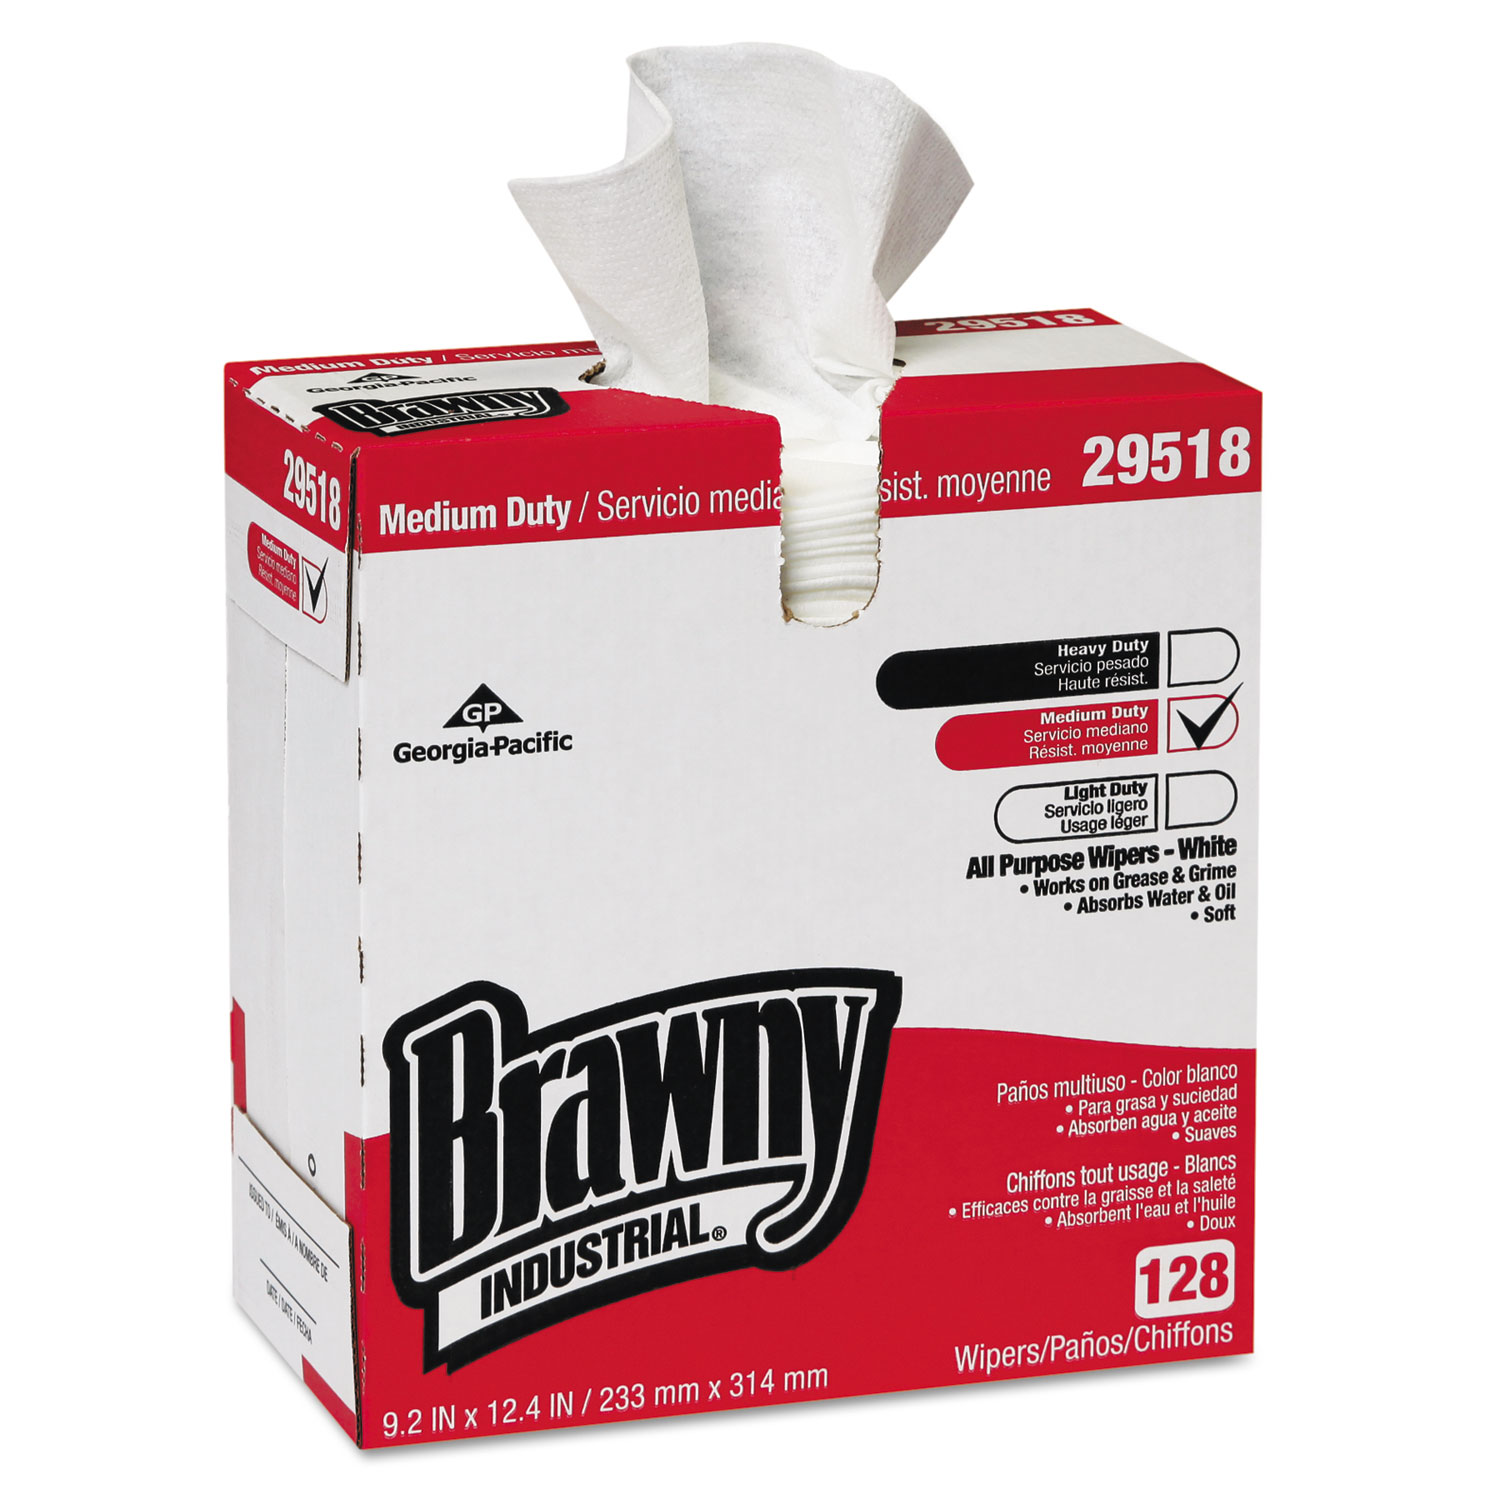  Georgia Pacific Professional 29518 Brawny Ind. Airlaid Med-Duty Wipers, Cloth, 9 1/5 x 12 2/5, WE, 128/BX, 10 BX/CT (GPC29518CT) 